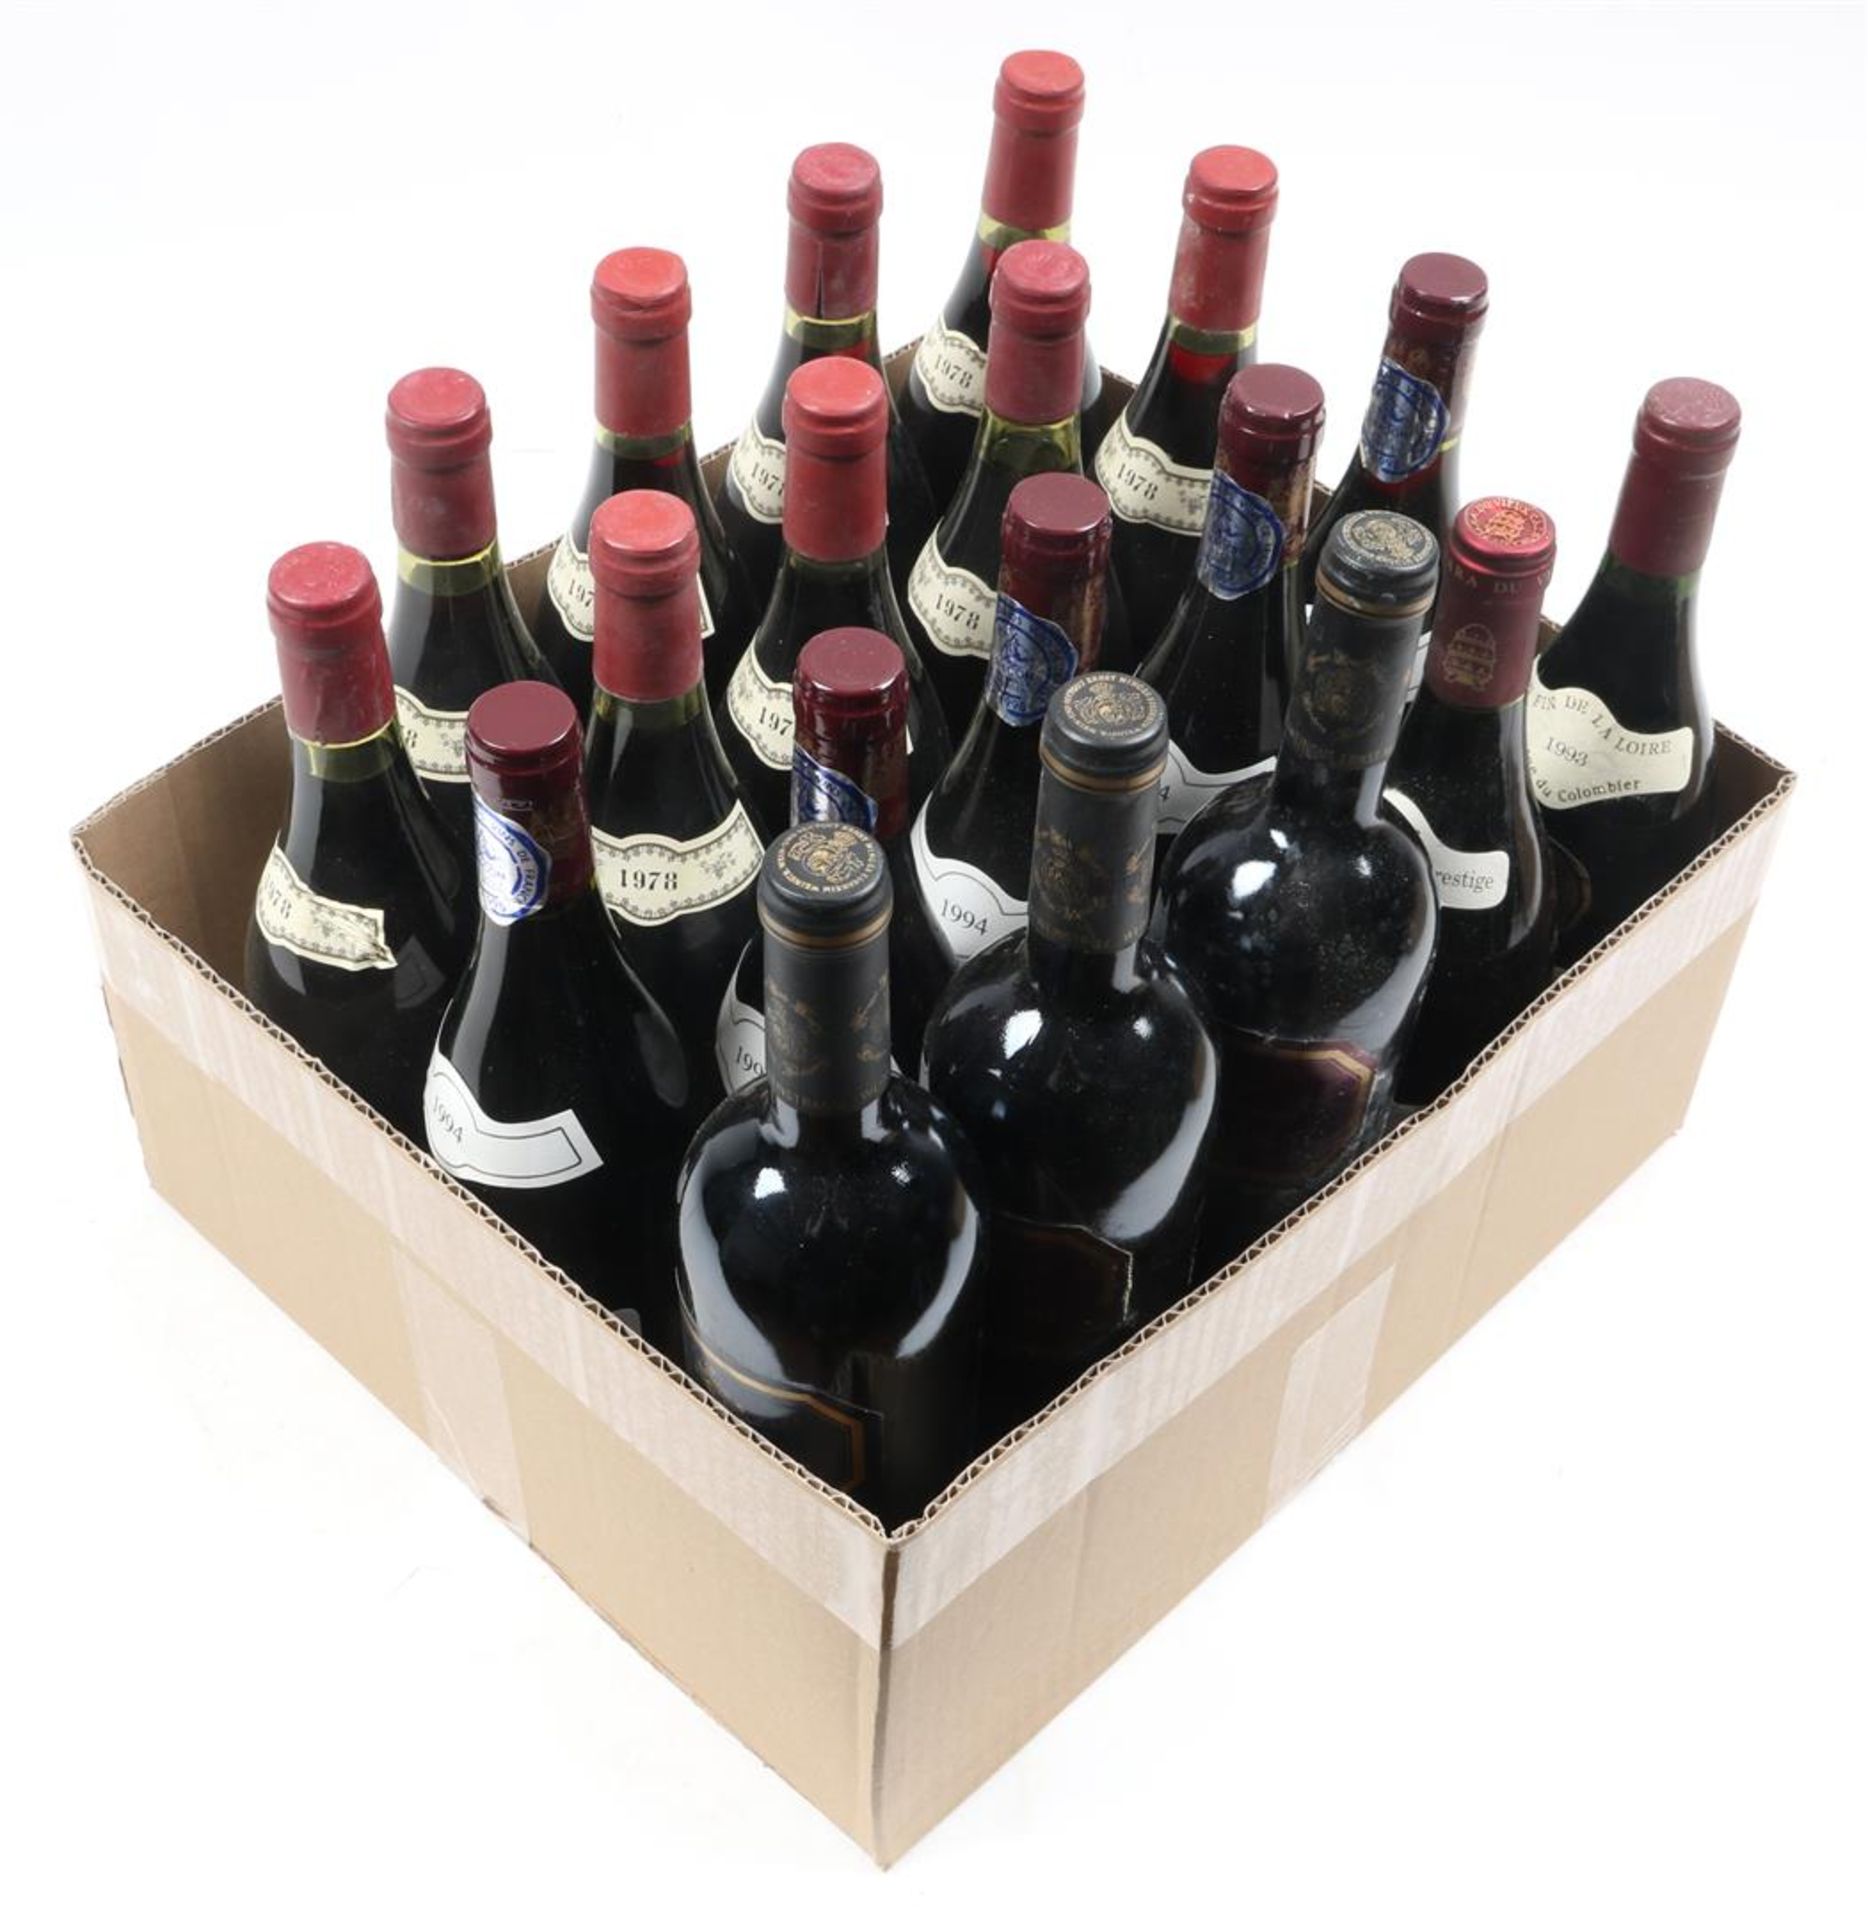 19 bottles of red wine including 9x Corton Renardes from 1978, 5x Chenas Domaine des Duc from